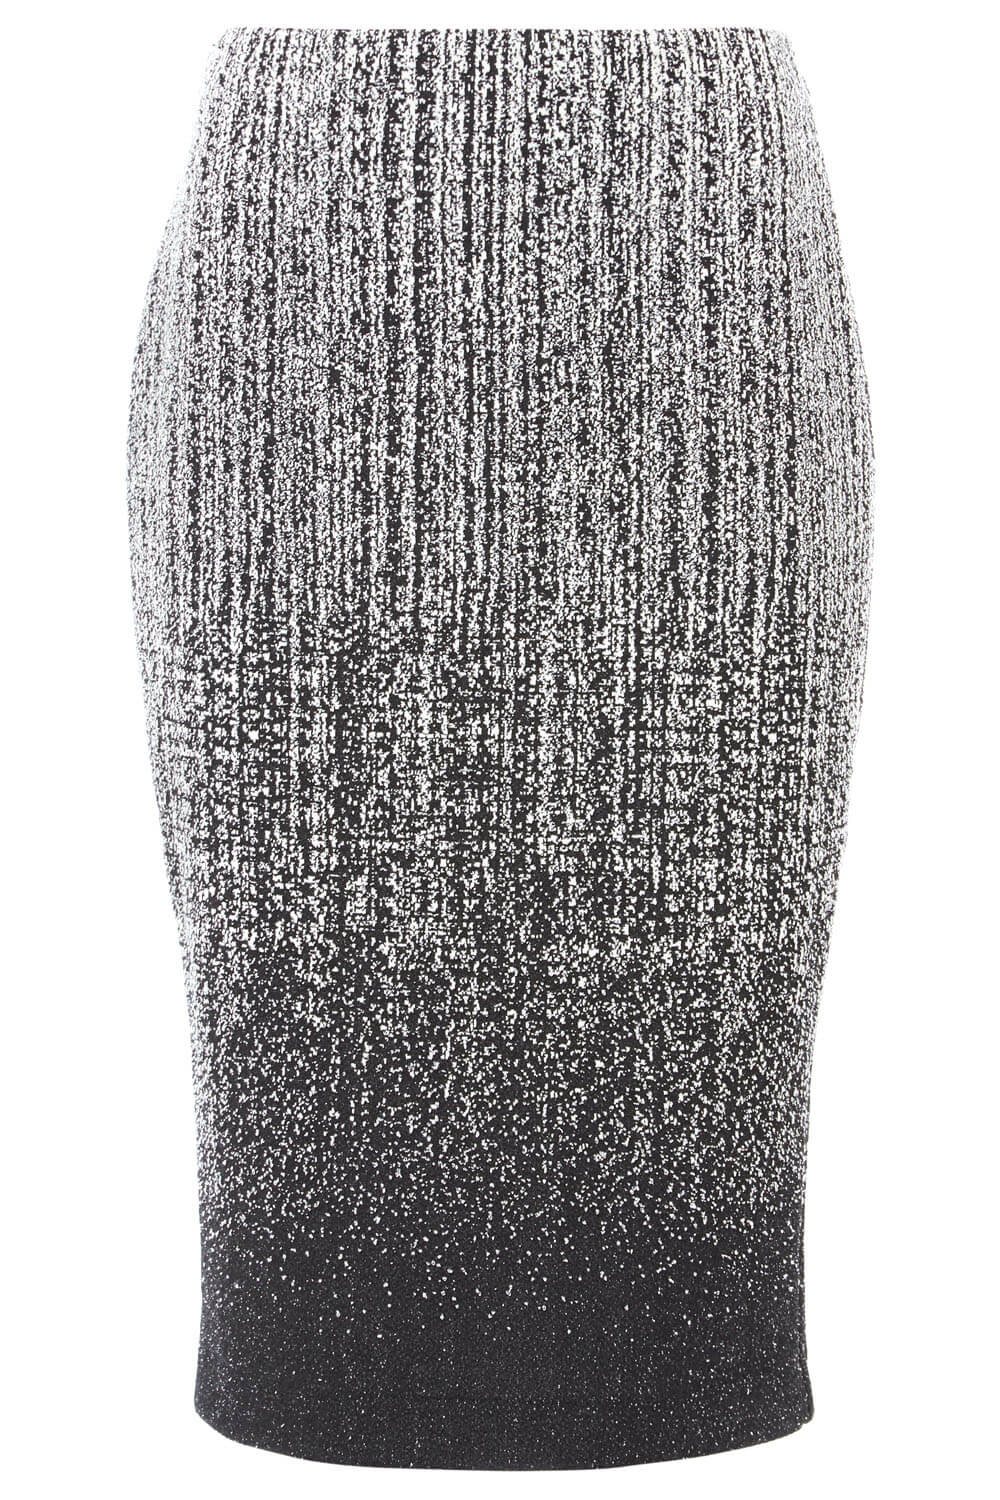 Black Ombre Texture Skirt, Image 5 of 5